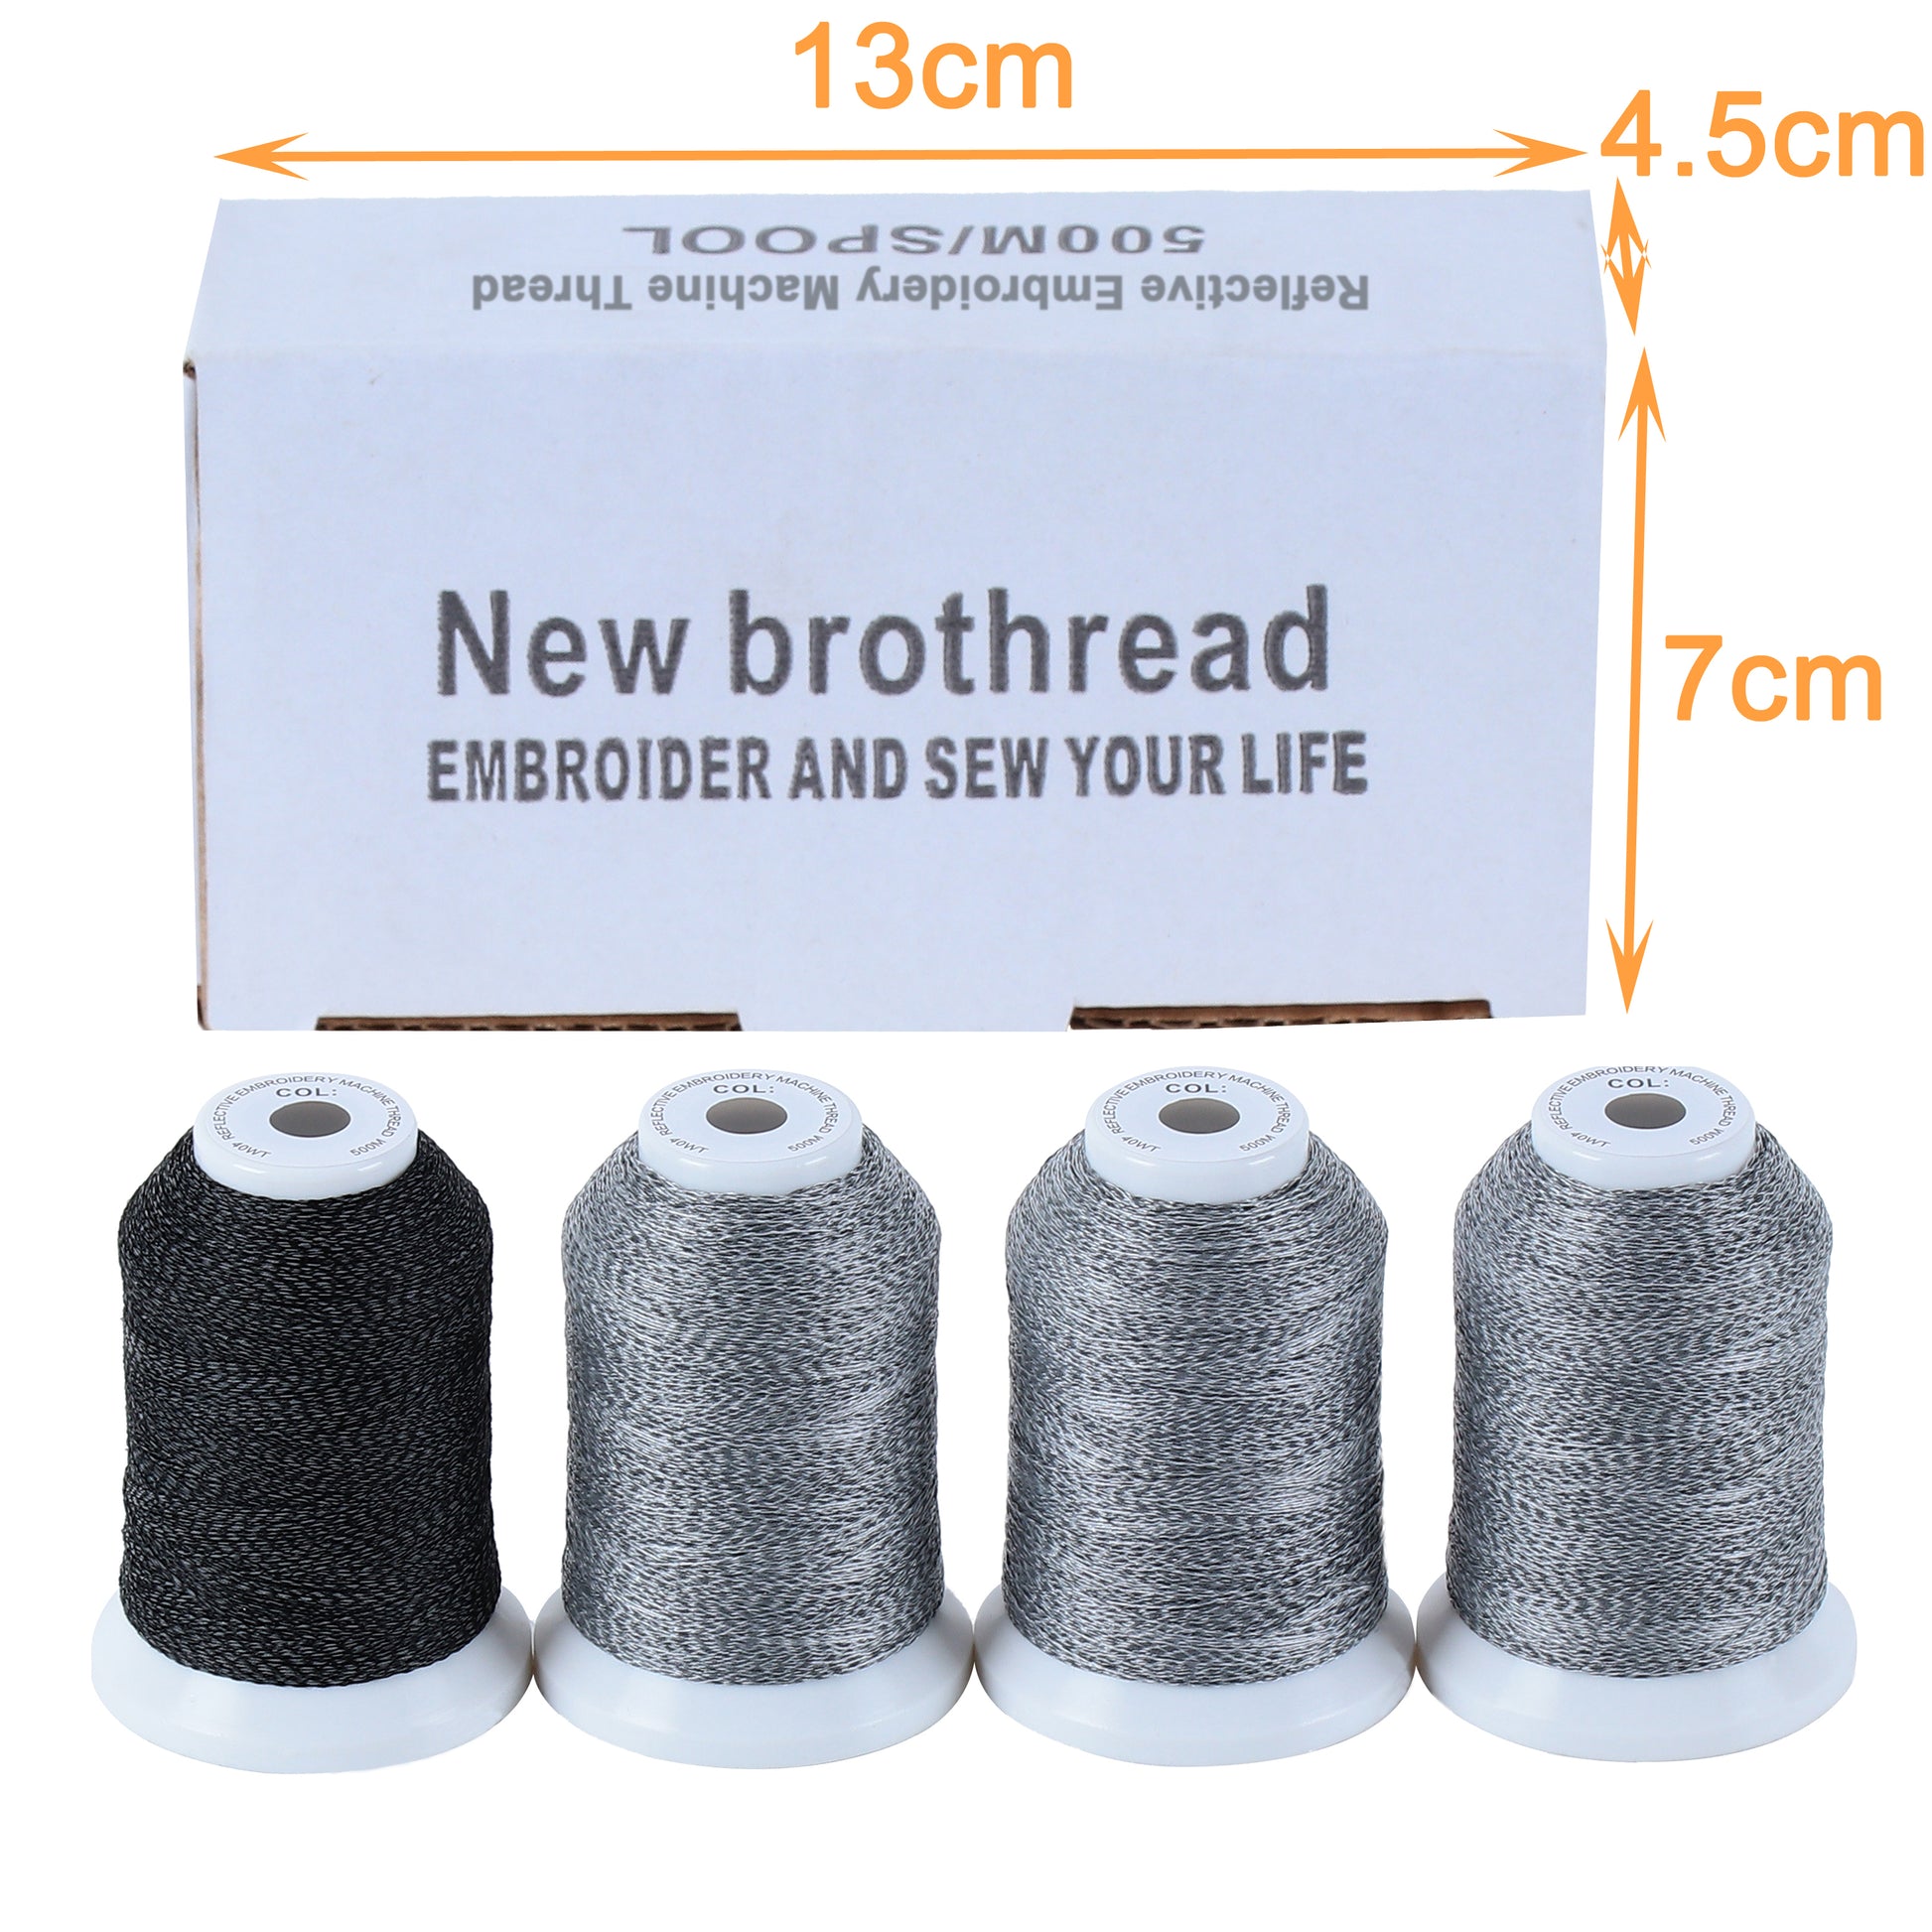 New brothread 12 Colors Variegated Polyester Embroidery Machine Thread Kit  500M (550Y) Each Spool for Brother Janome Babylock Singer Pfaff Bernina